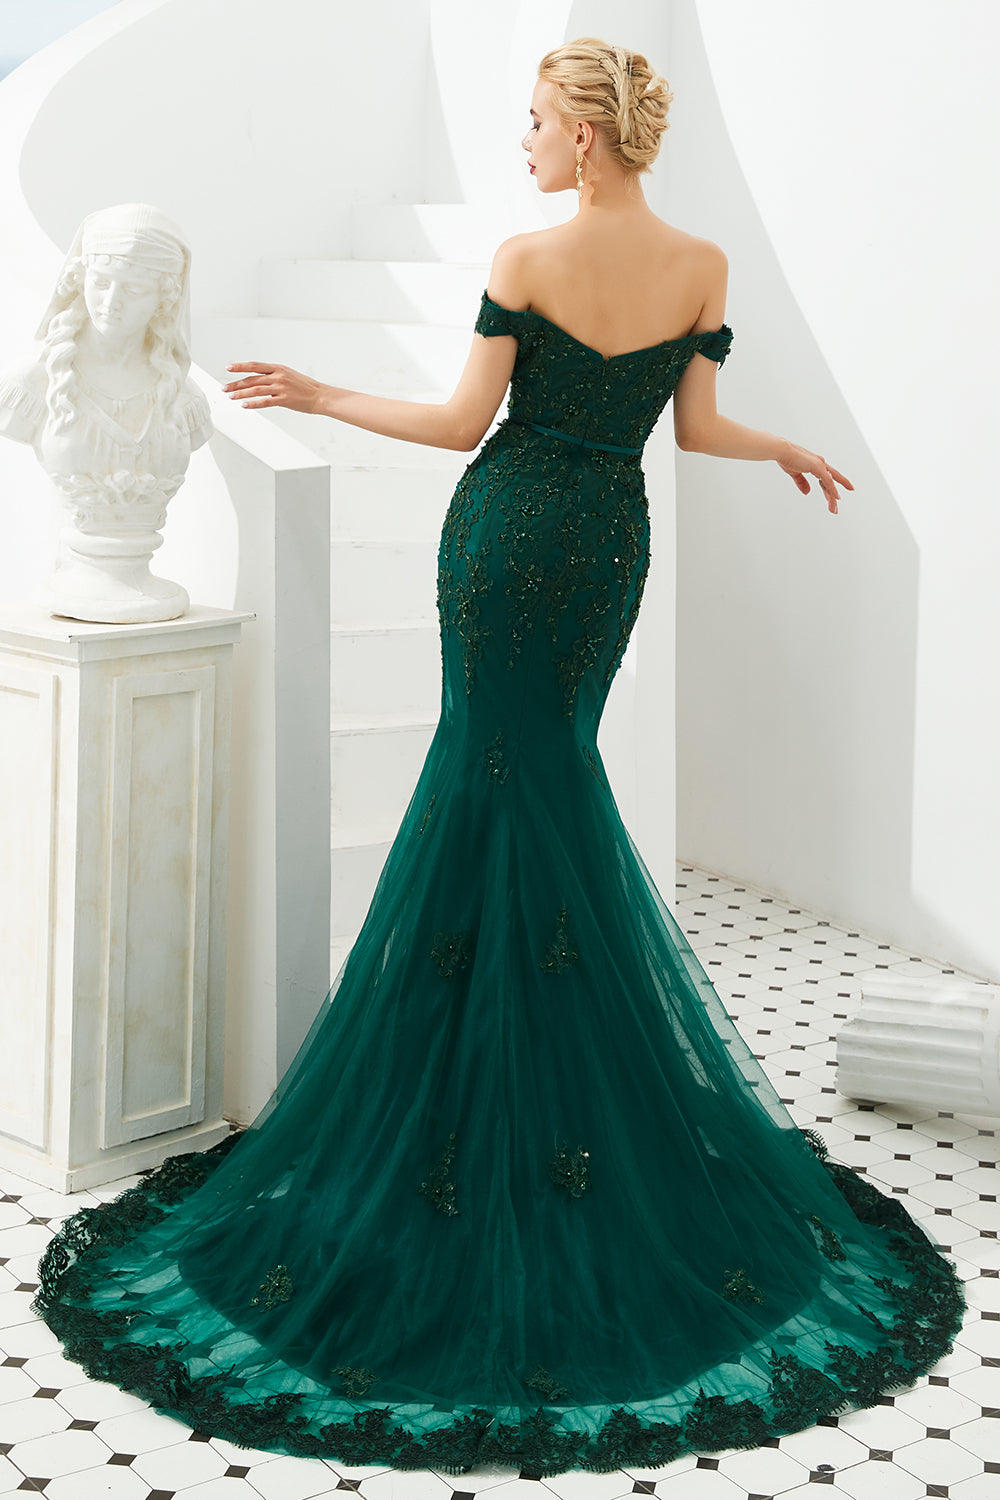 Load image into Gallery viewer, Elegant Long Mermaid Off-the-shoulder Tulle Lace Prom Dress-BIZTUNNEL
